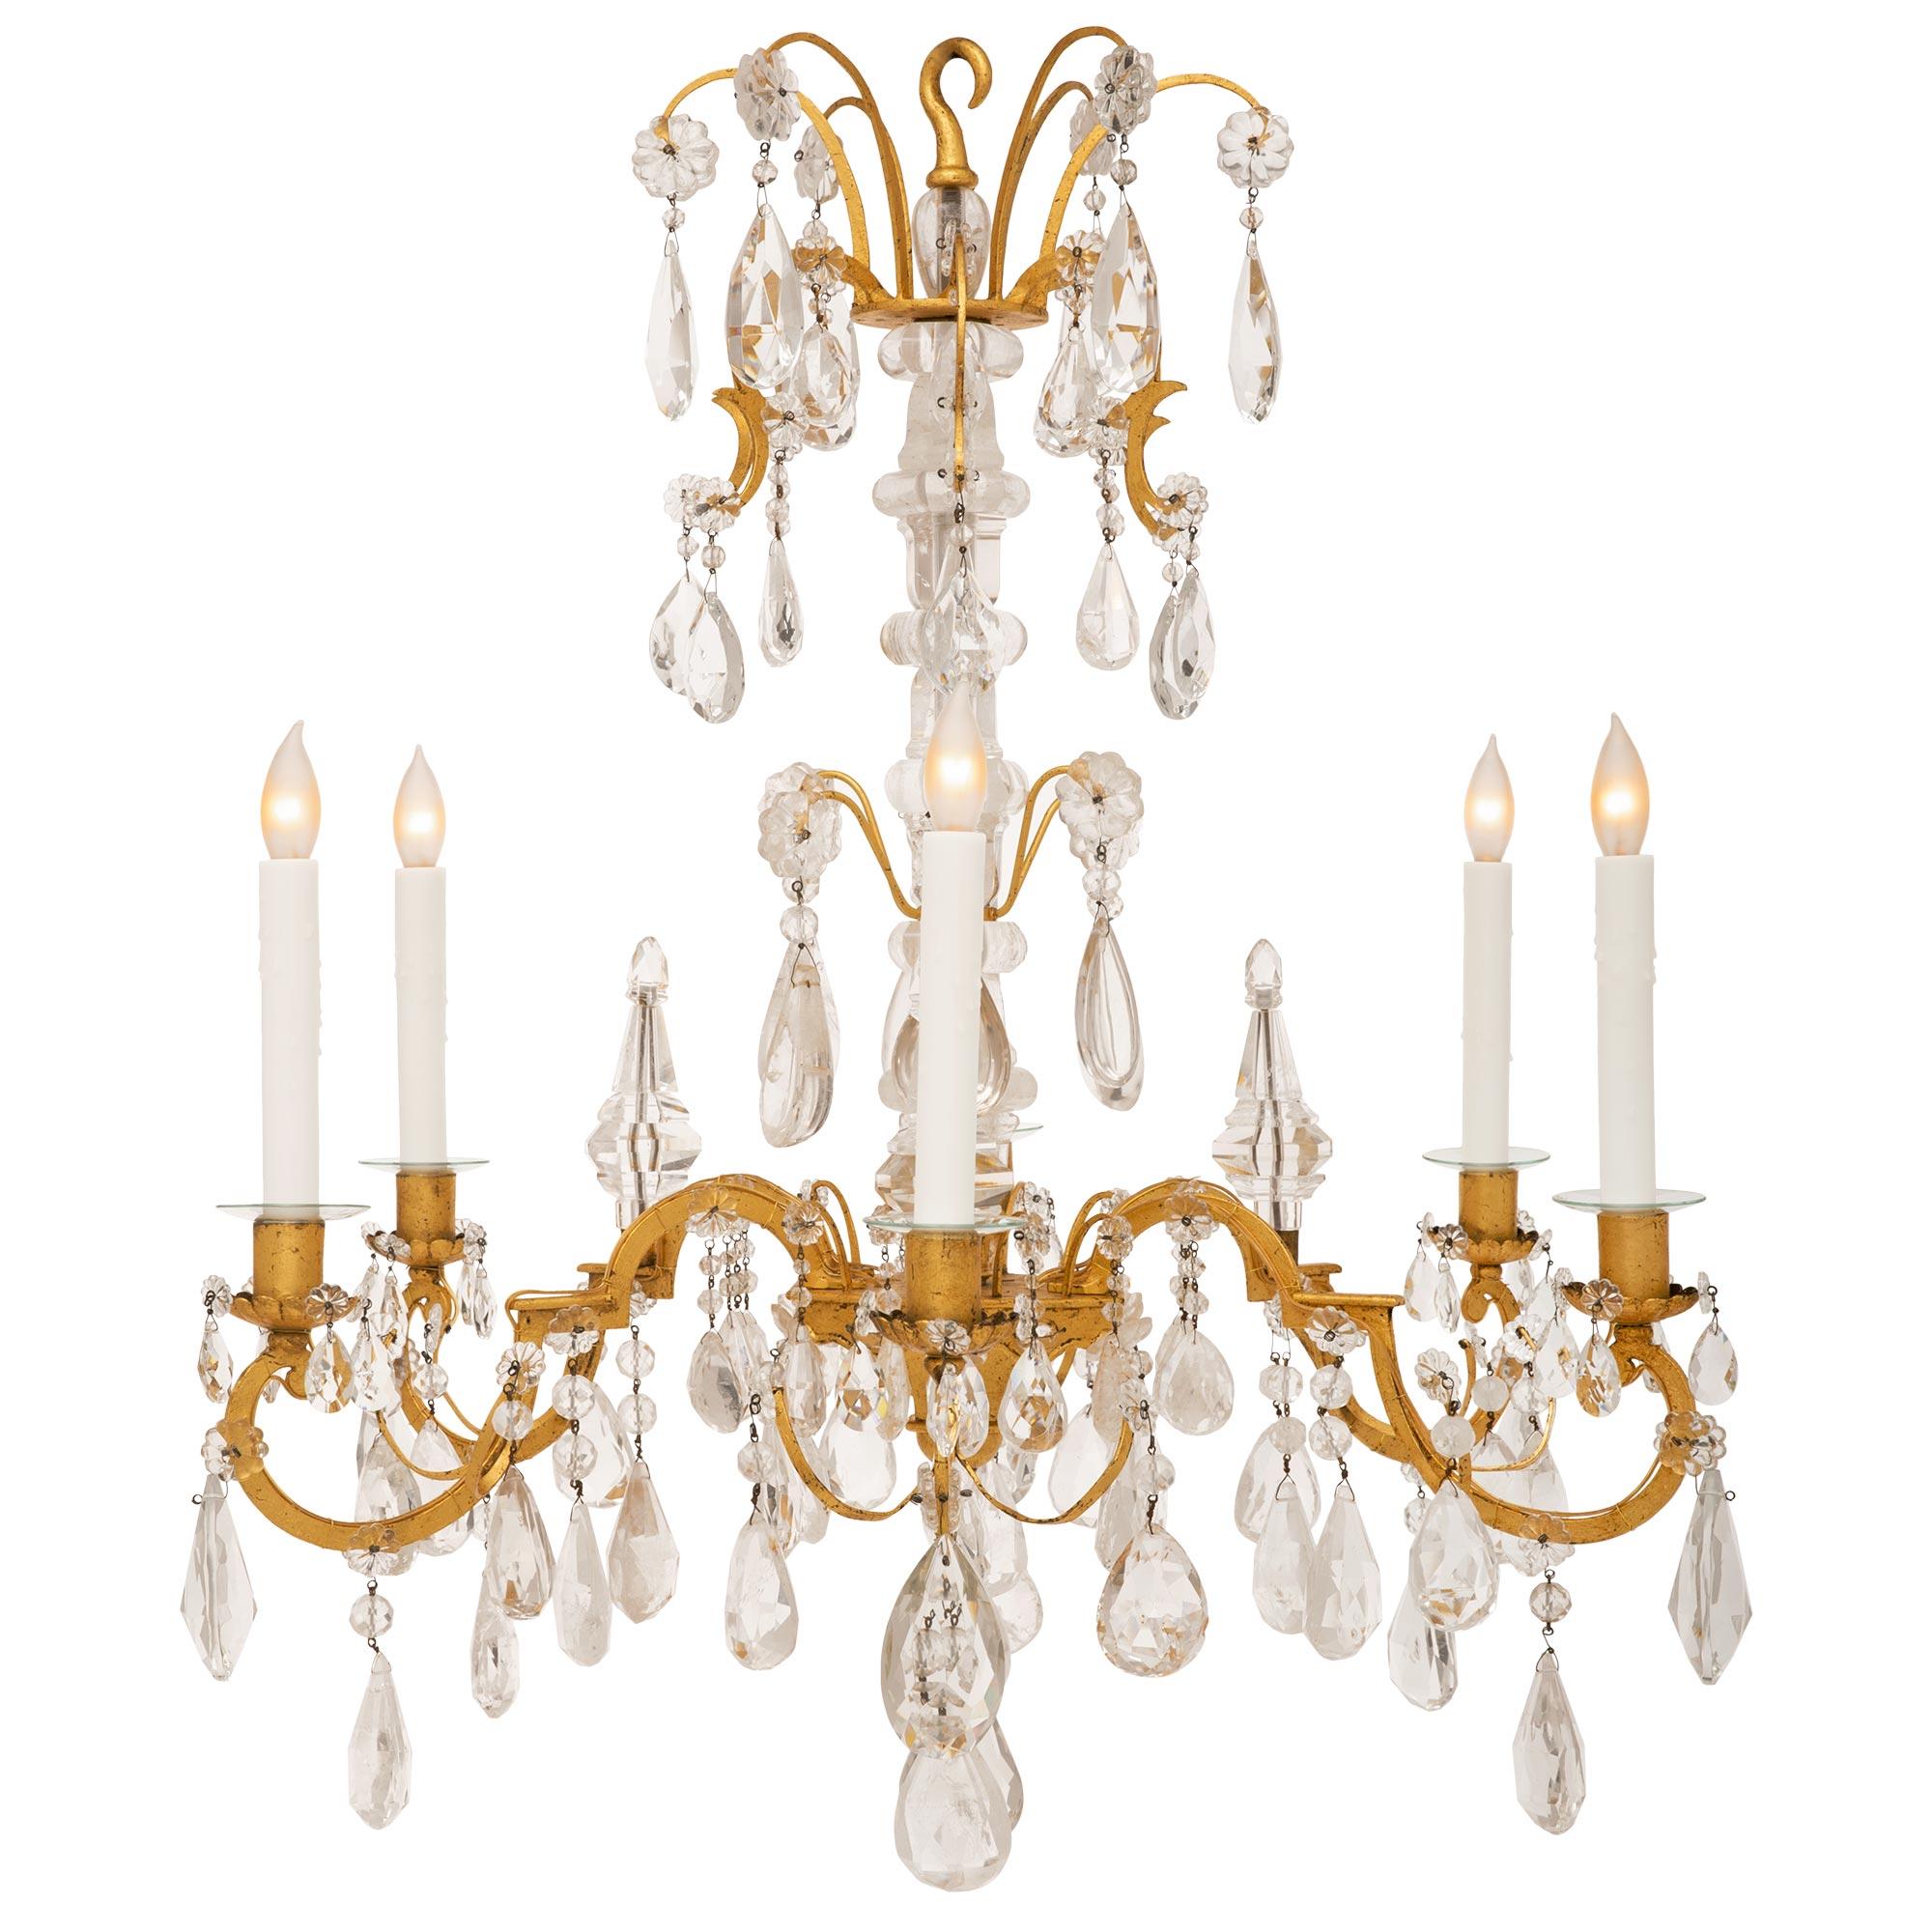 A beautiful French 19th century Louis XV st. gilt metal and rock crystal chandelier. The six arm chandelier is centered by a solid bottom crystal pendant below an elegant mottled lightly curved support and surrounded by a remarkable array of most